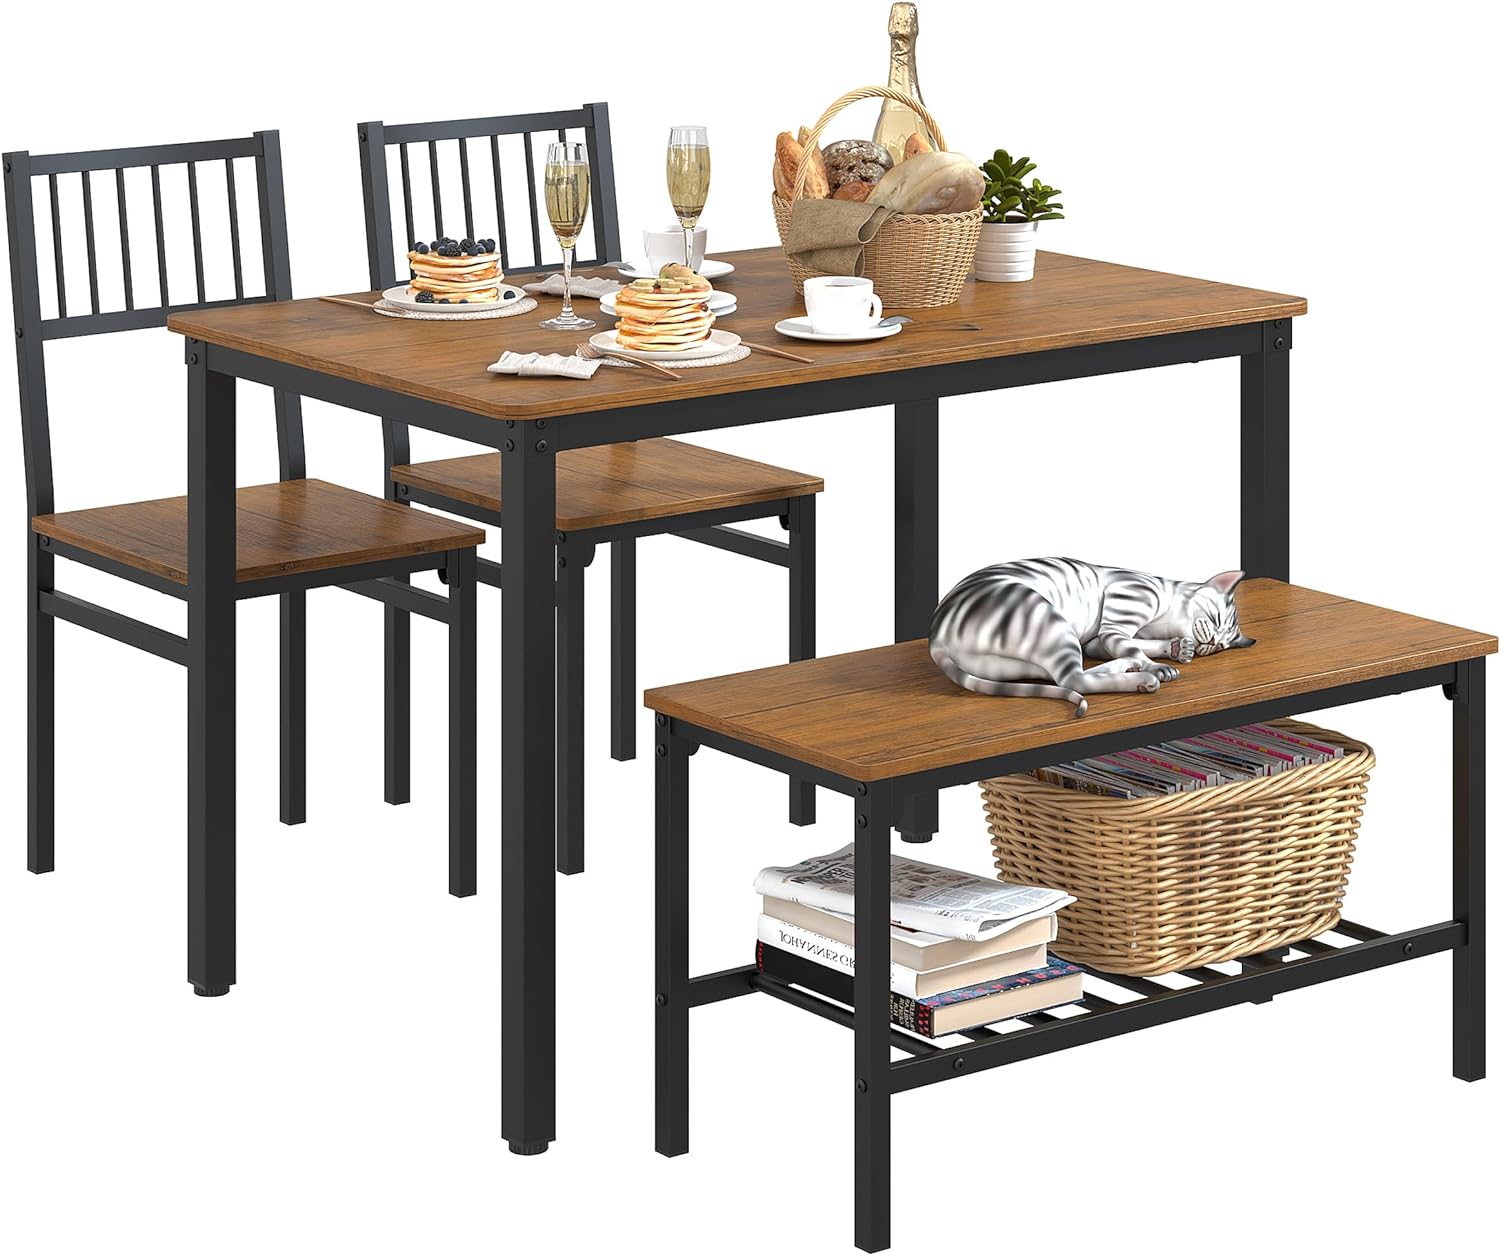 Teraves Dining Table Set for 4/Computer Desk,Kitchen Table with 2 Chairs and a Bench,Table and Chairs Dining Room Set 4 Piece Set for Dining Room (Teak, 110CM)/ 43.31